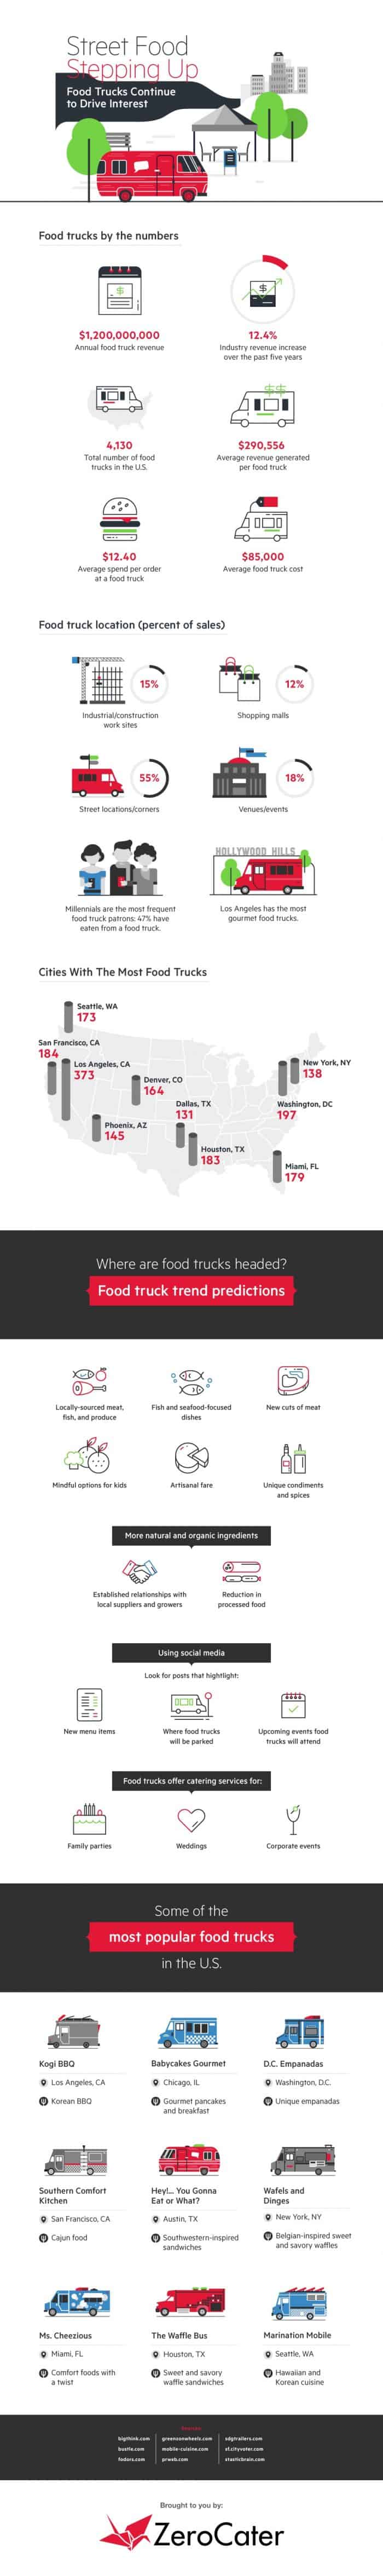 Food Trucks By The Numbers